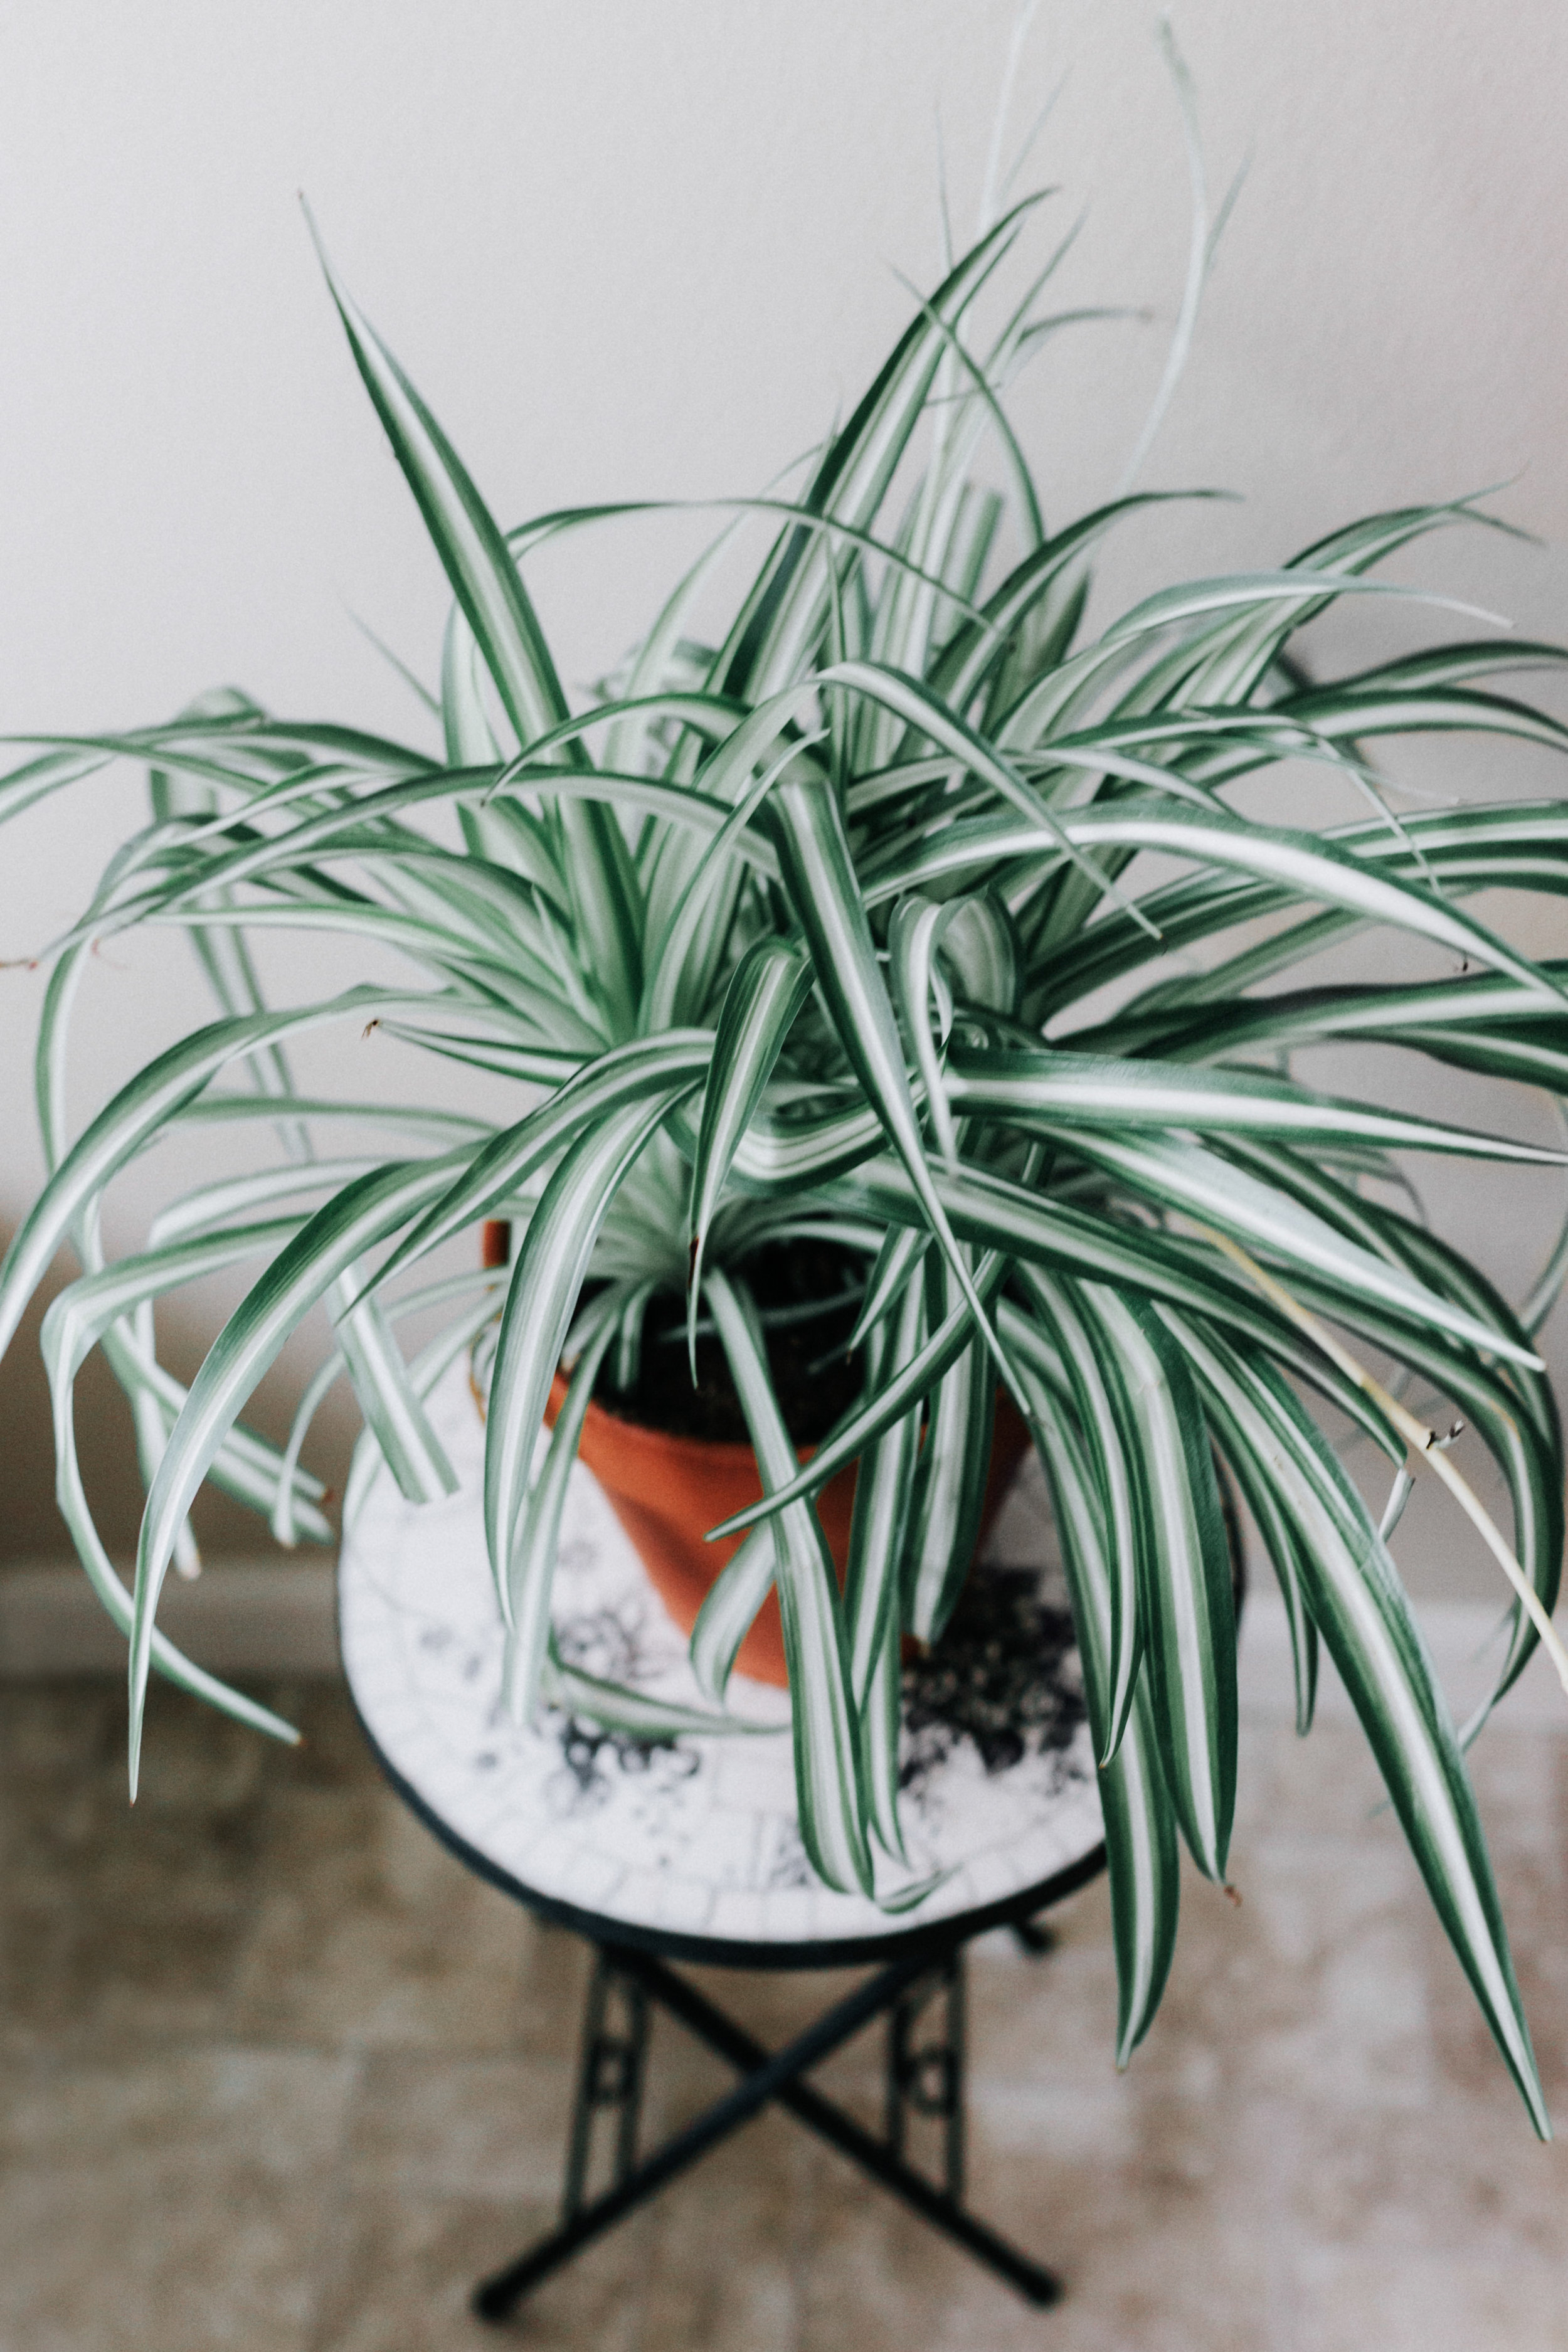 Spider Plant Chlorophytum Comosum Houseplant Academy Houseplant Courses And Education For The Indoor Plant Person